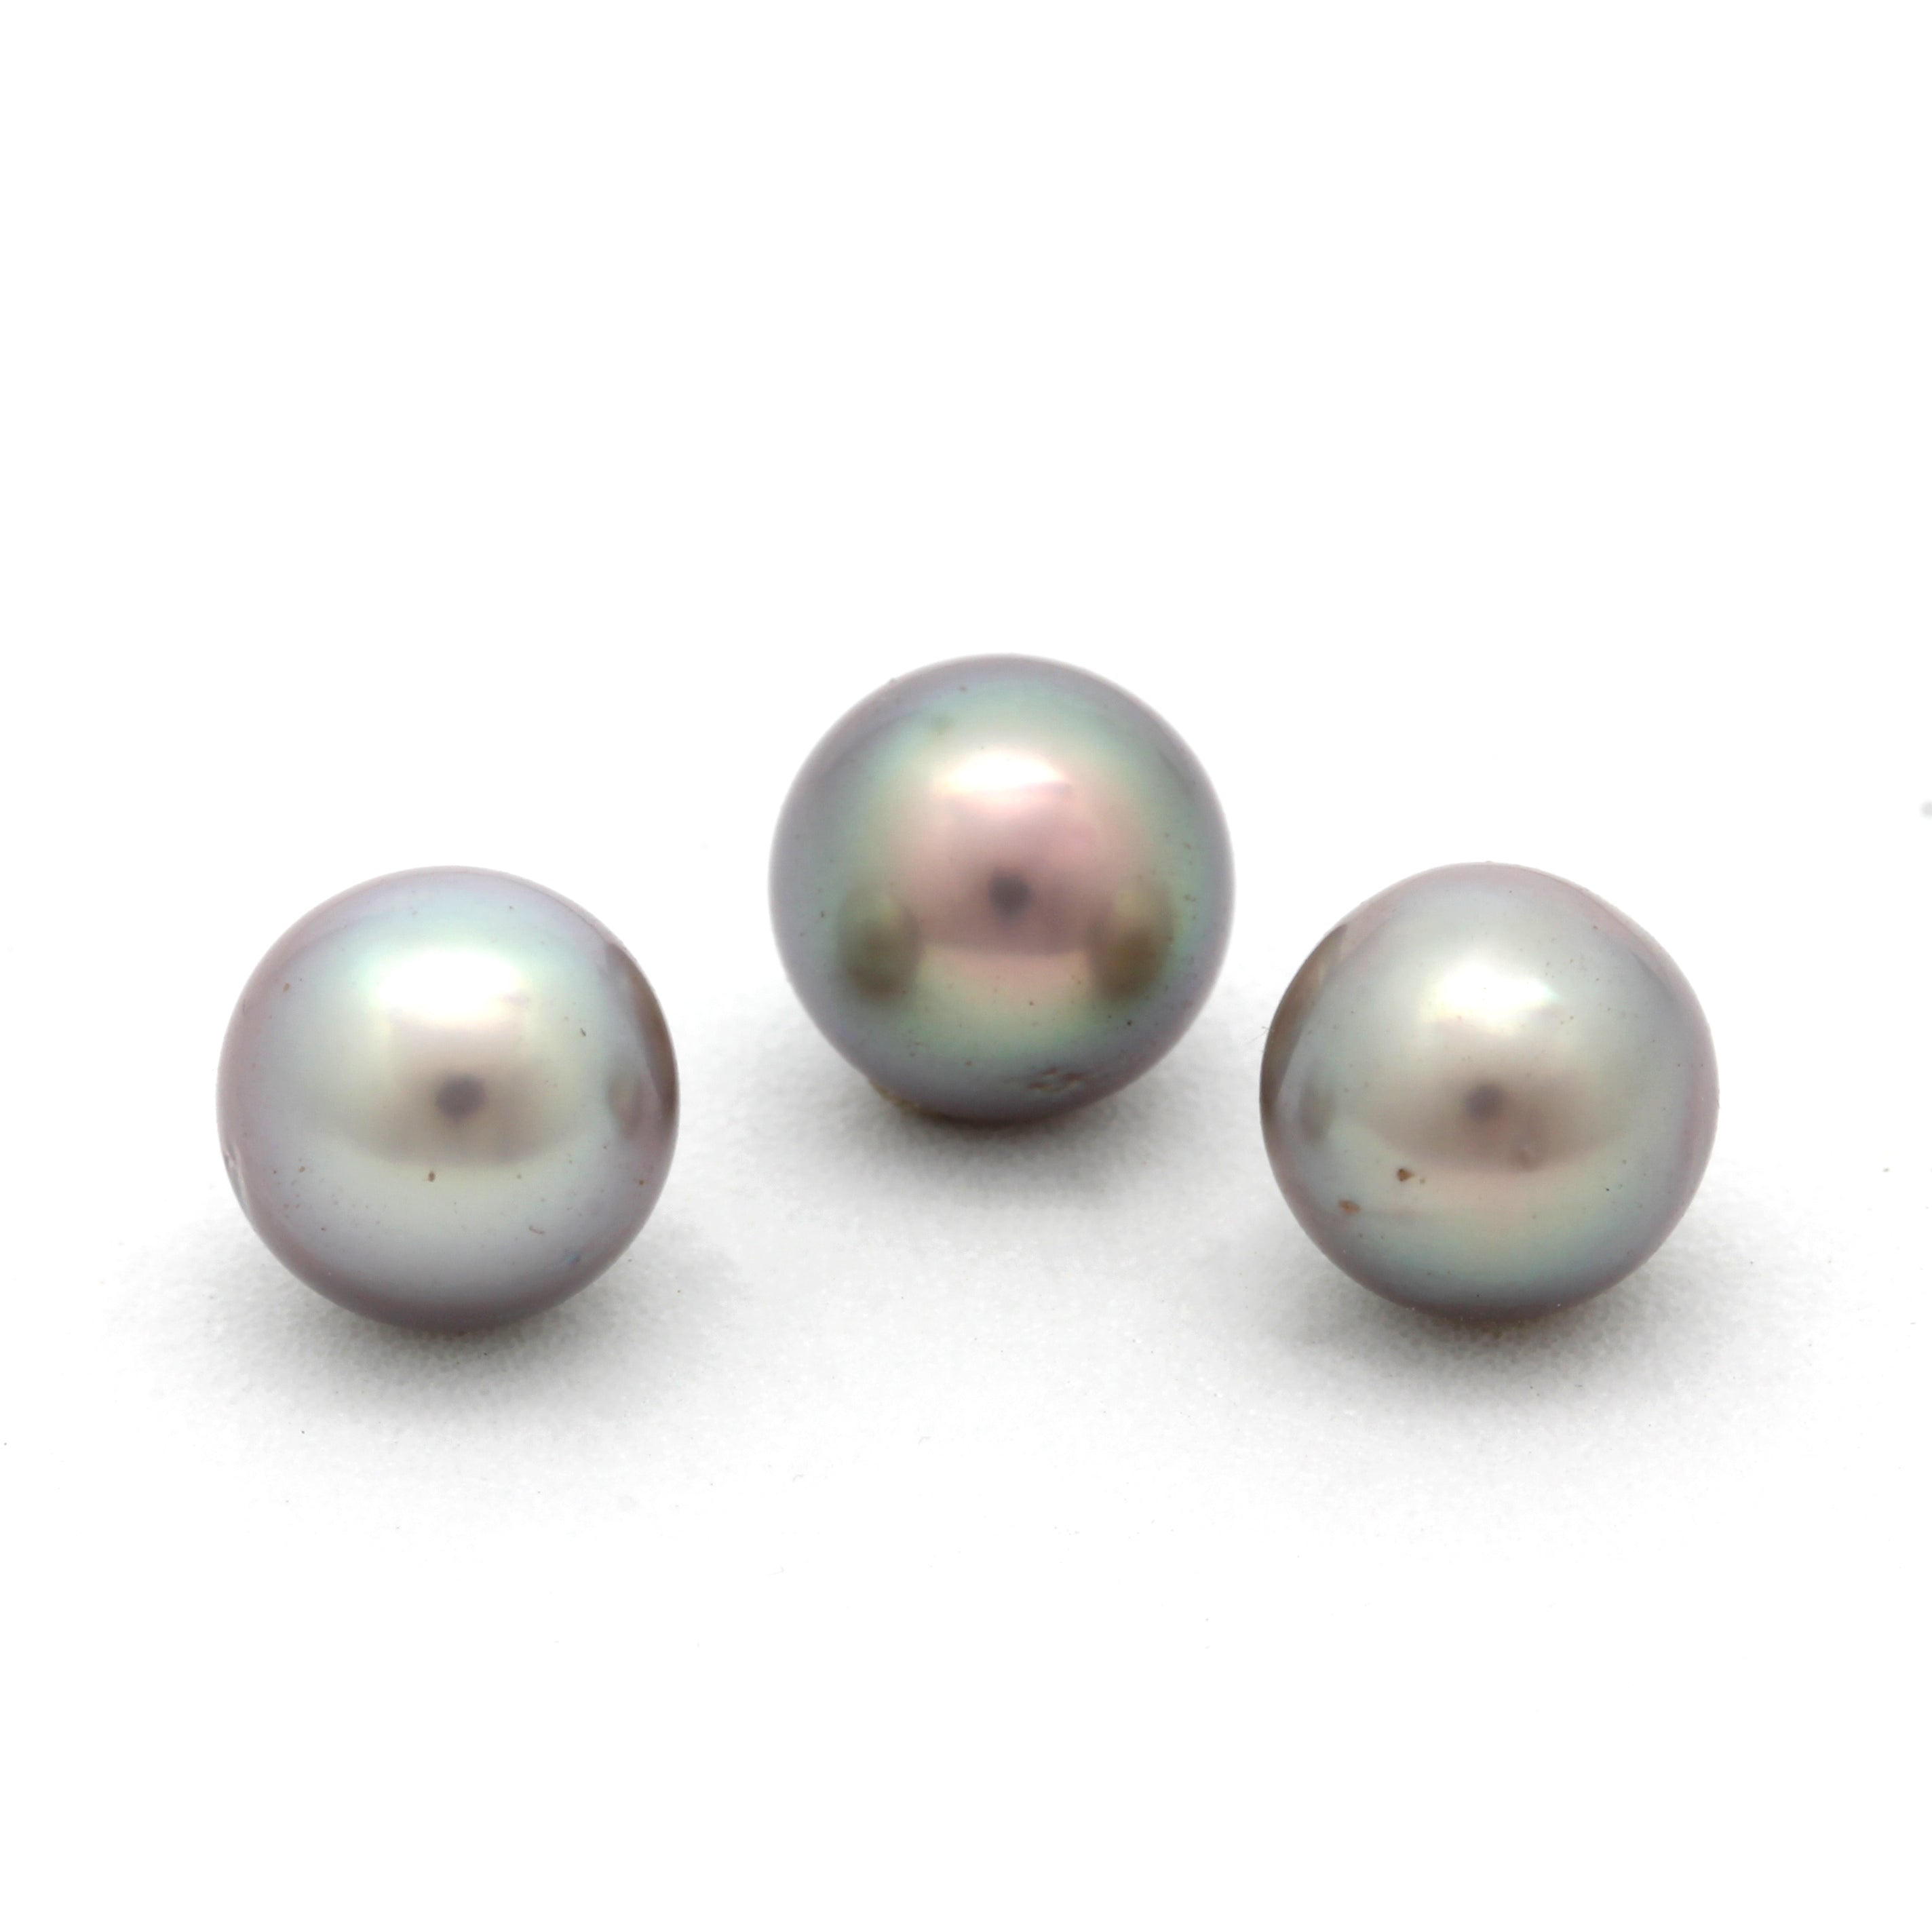 Lot of 3 Baroque Cortez Pearls from 2019 HARVEST